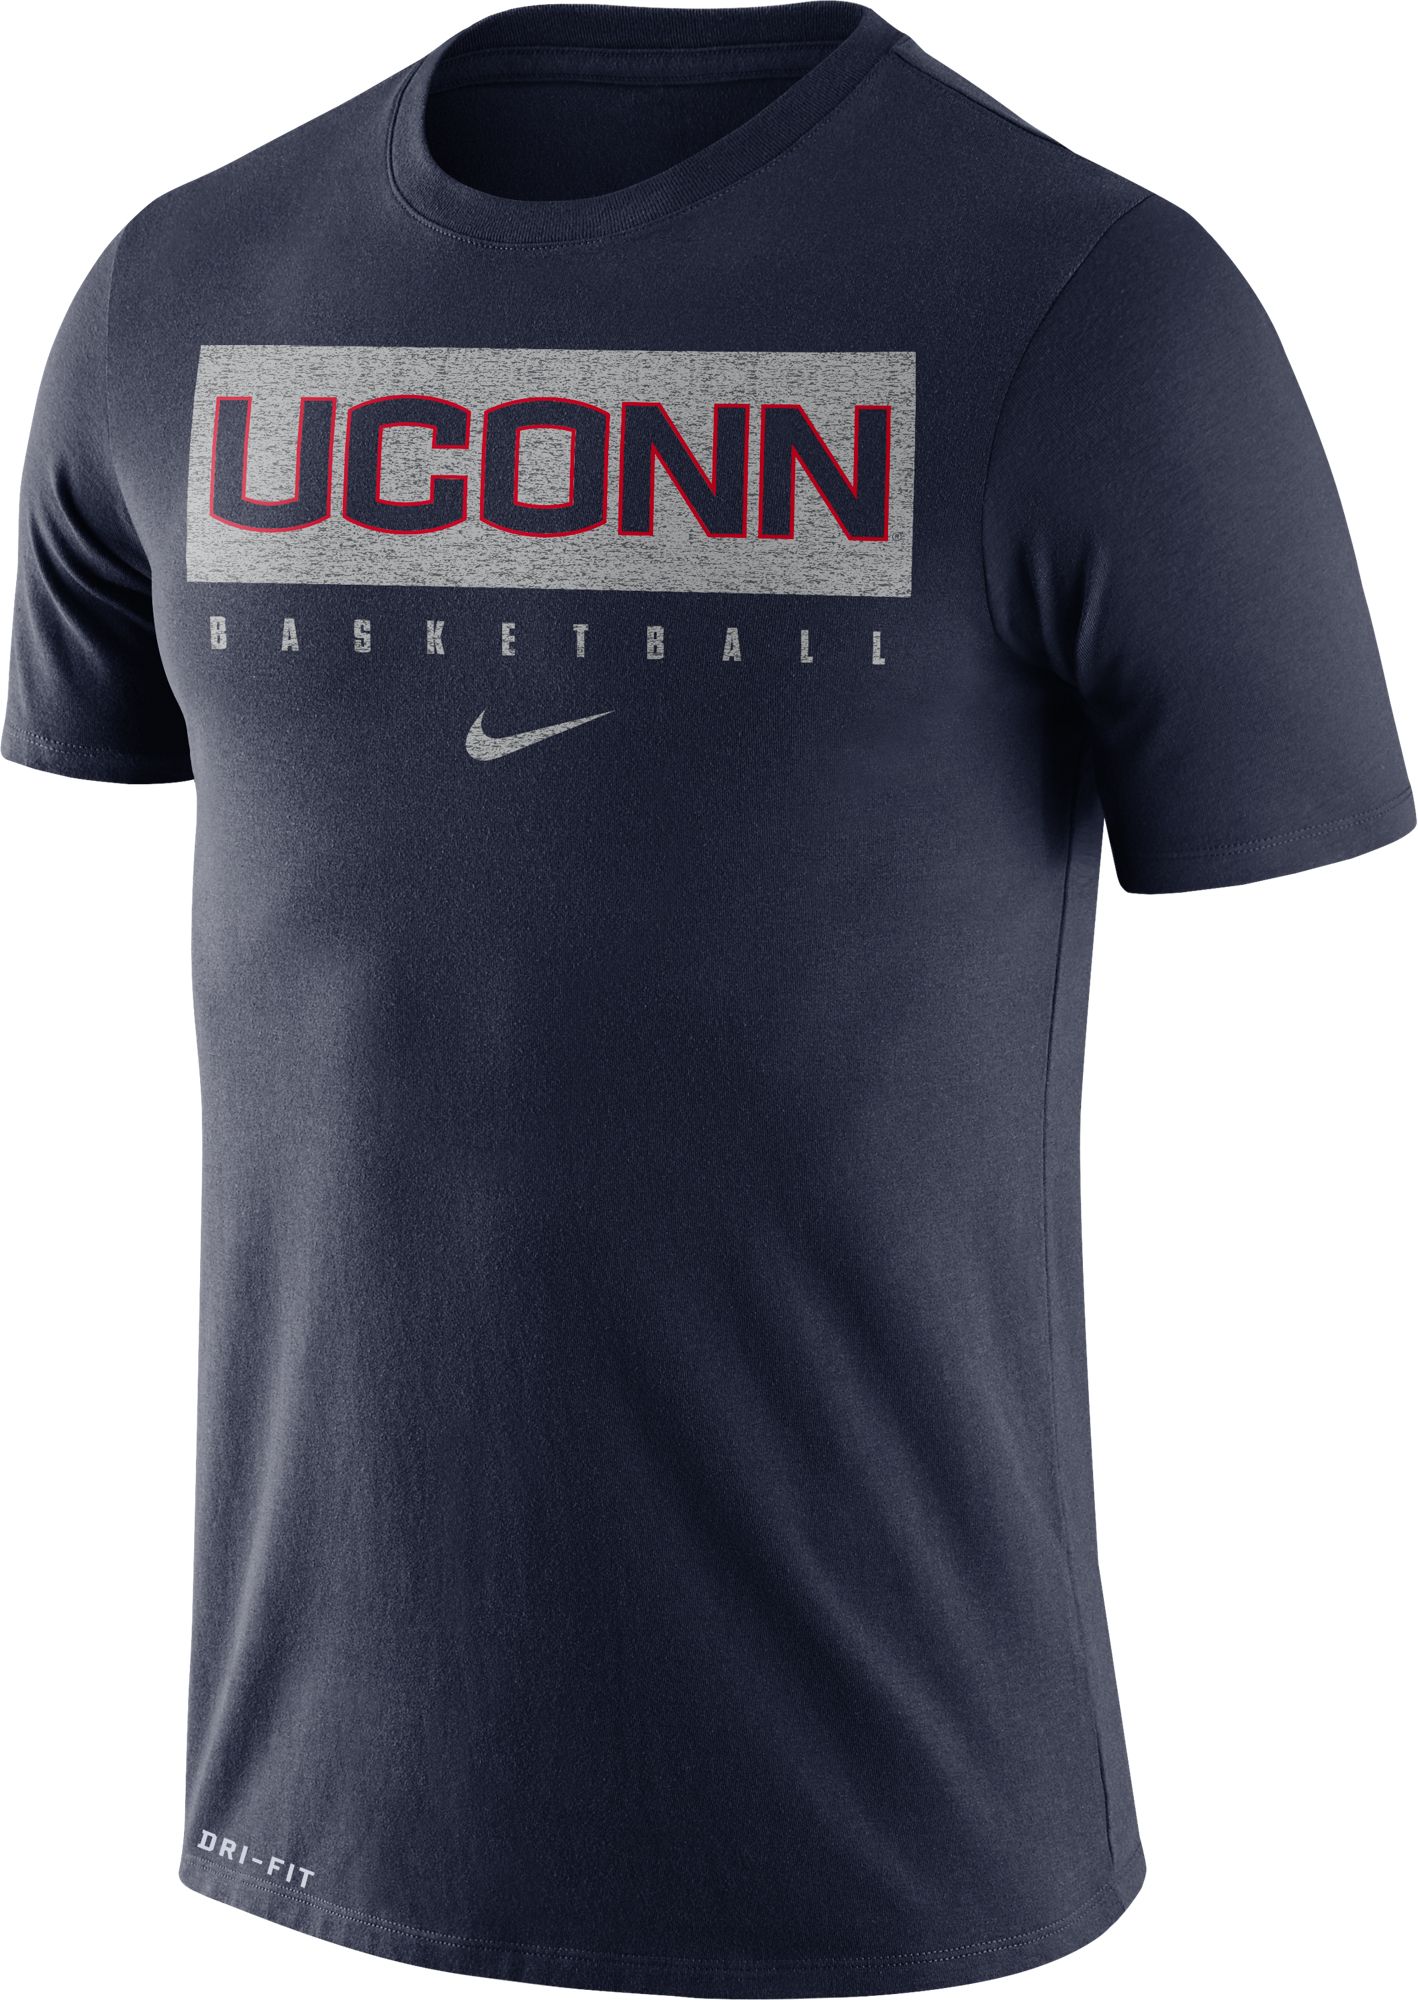 UConn Basketball Apparel & Gear | Best Price Guarantee at DICK'S